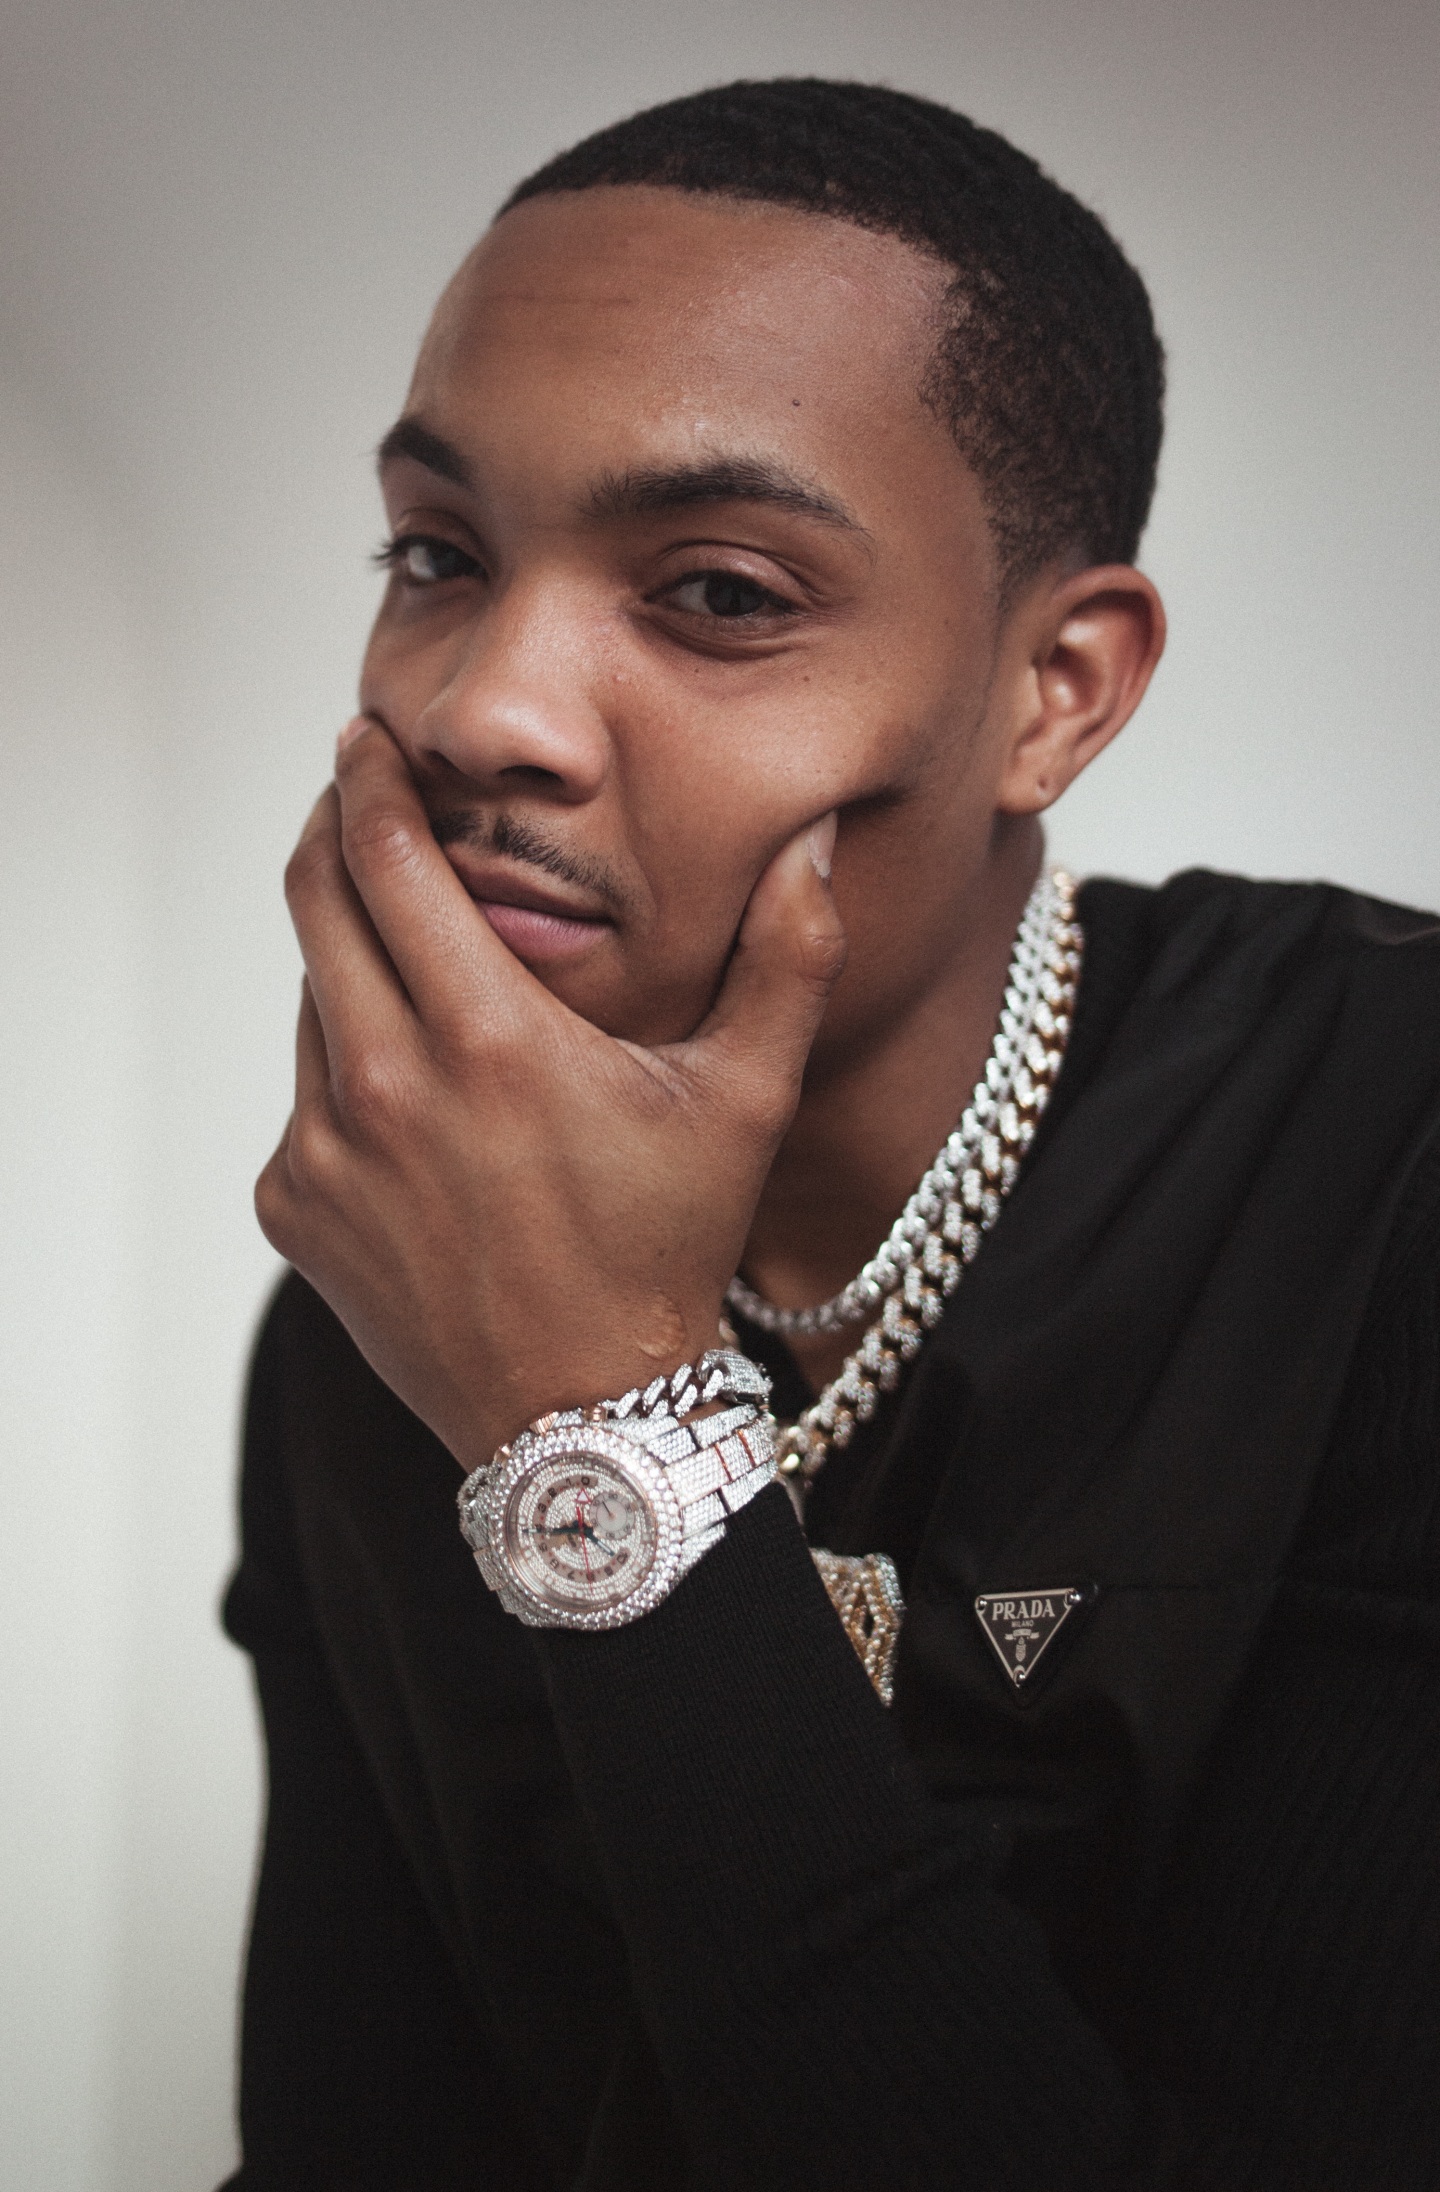 G Herbo on the neglect and courage that inspired his new album <i>PTSD</i>